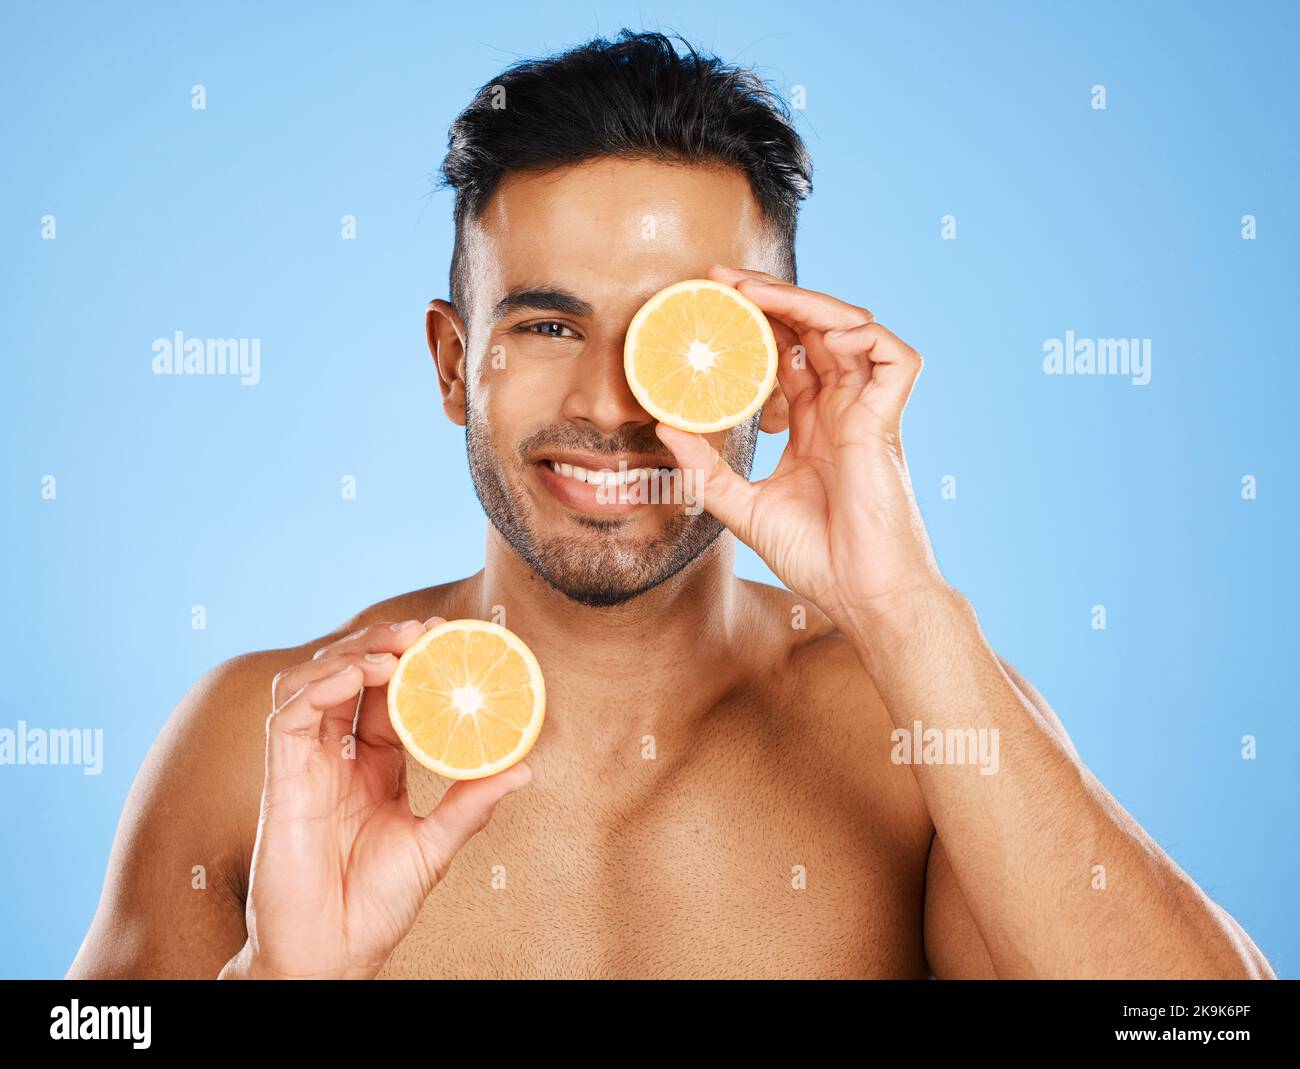 Vitamin C, lemon and male skincare portrait for healthy, glowing face skin on studio background. Health, wellness and citrus treatment for smooth and Stock Photo